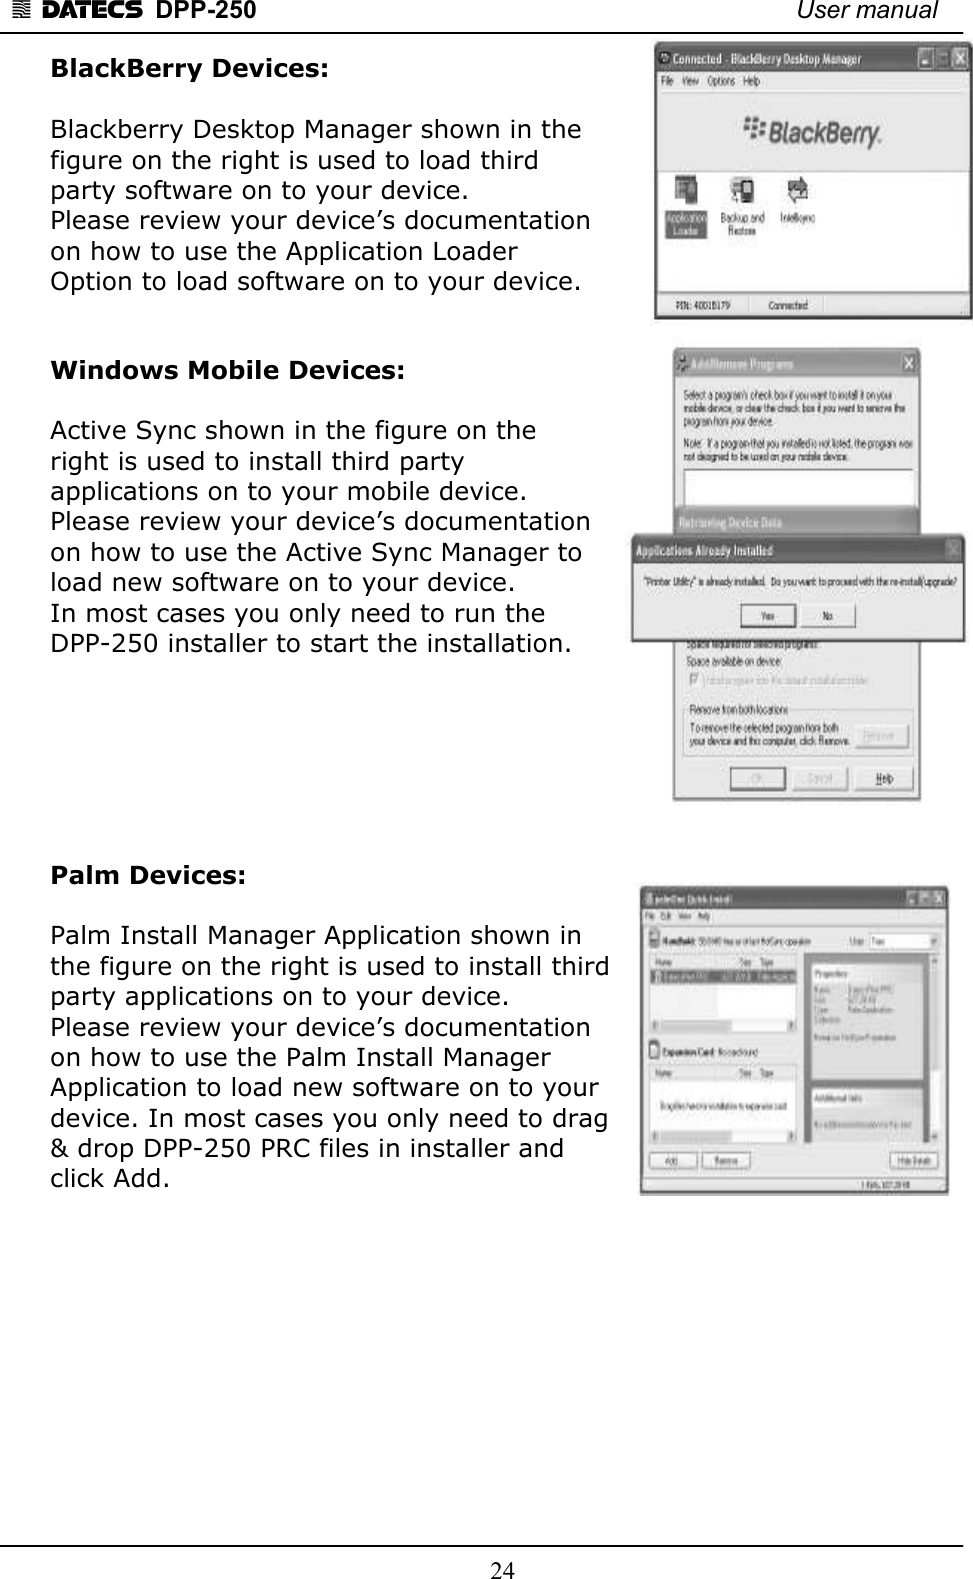 1 DATECS  DPP-250    User manual     24 BlackBerry Devices:   Blackberry Desktop Manager shown in the  figure on the right is used to load third  party software on to your device.   Please review your device’s documentation  on how to use the Application Loader  Option to load software on to your device.   Windows Mobile Devices:   Active Sync shown in the figure on the  right is used to install third party  applications on to your mobile device.   Please review your device’s documentation  on how to use the Active Sync Manager to  load new software on to your device.  In most cases you only need to run the  DPP-250 installer to start the installation.        Palm Devices:   Palm Install Manager Application shown in  the figure on the right is used to install third  party applications on to your device.  Please review your device’s documentation  on how to use the Palm Install Manager  Application to load new software on to your  device. In most cases you only need to drag  &amp; drop DPP-250 PRC files in installer and  click Add.            